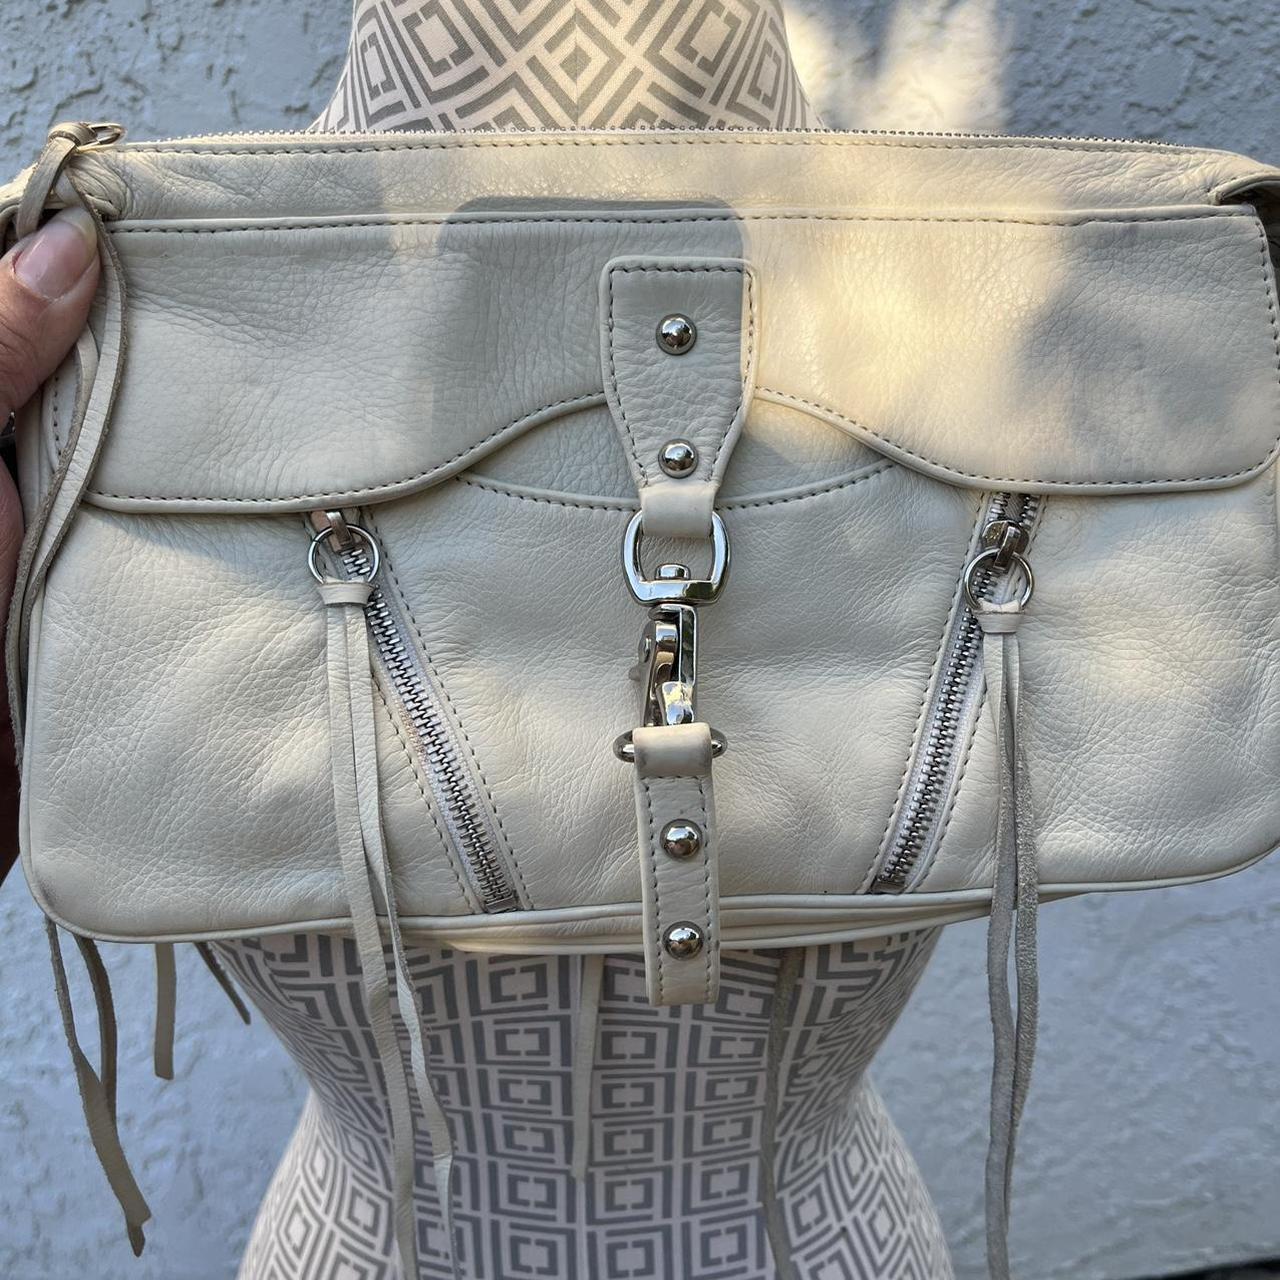 Botkier Women's White and Silver Bag